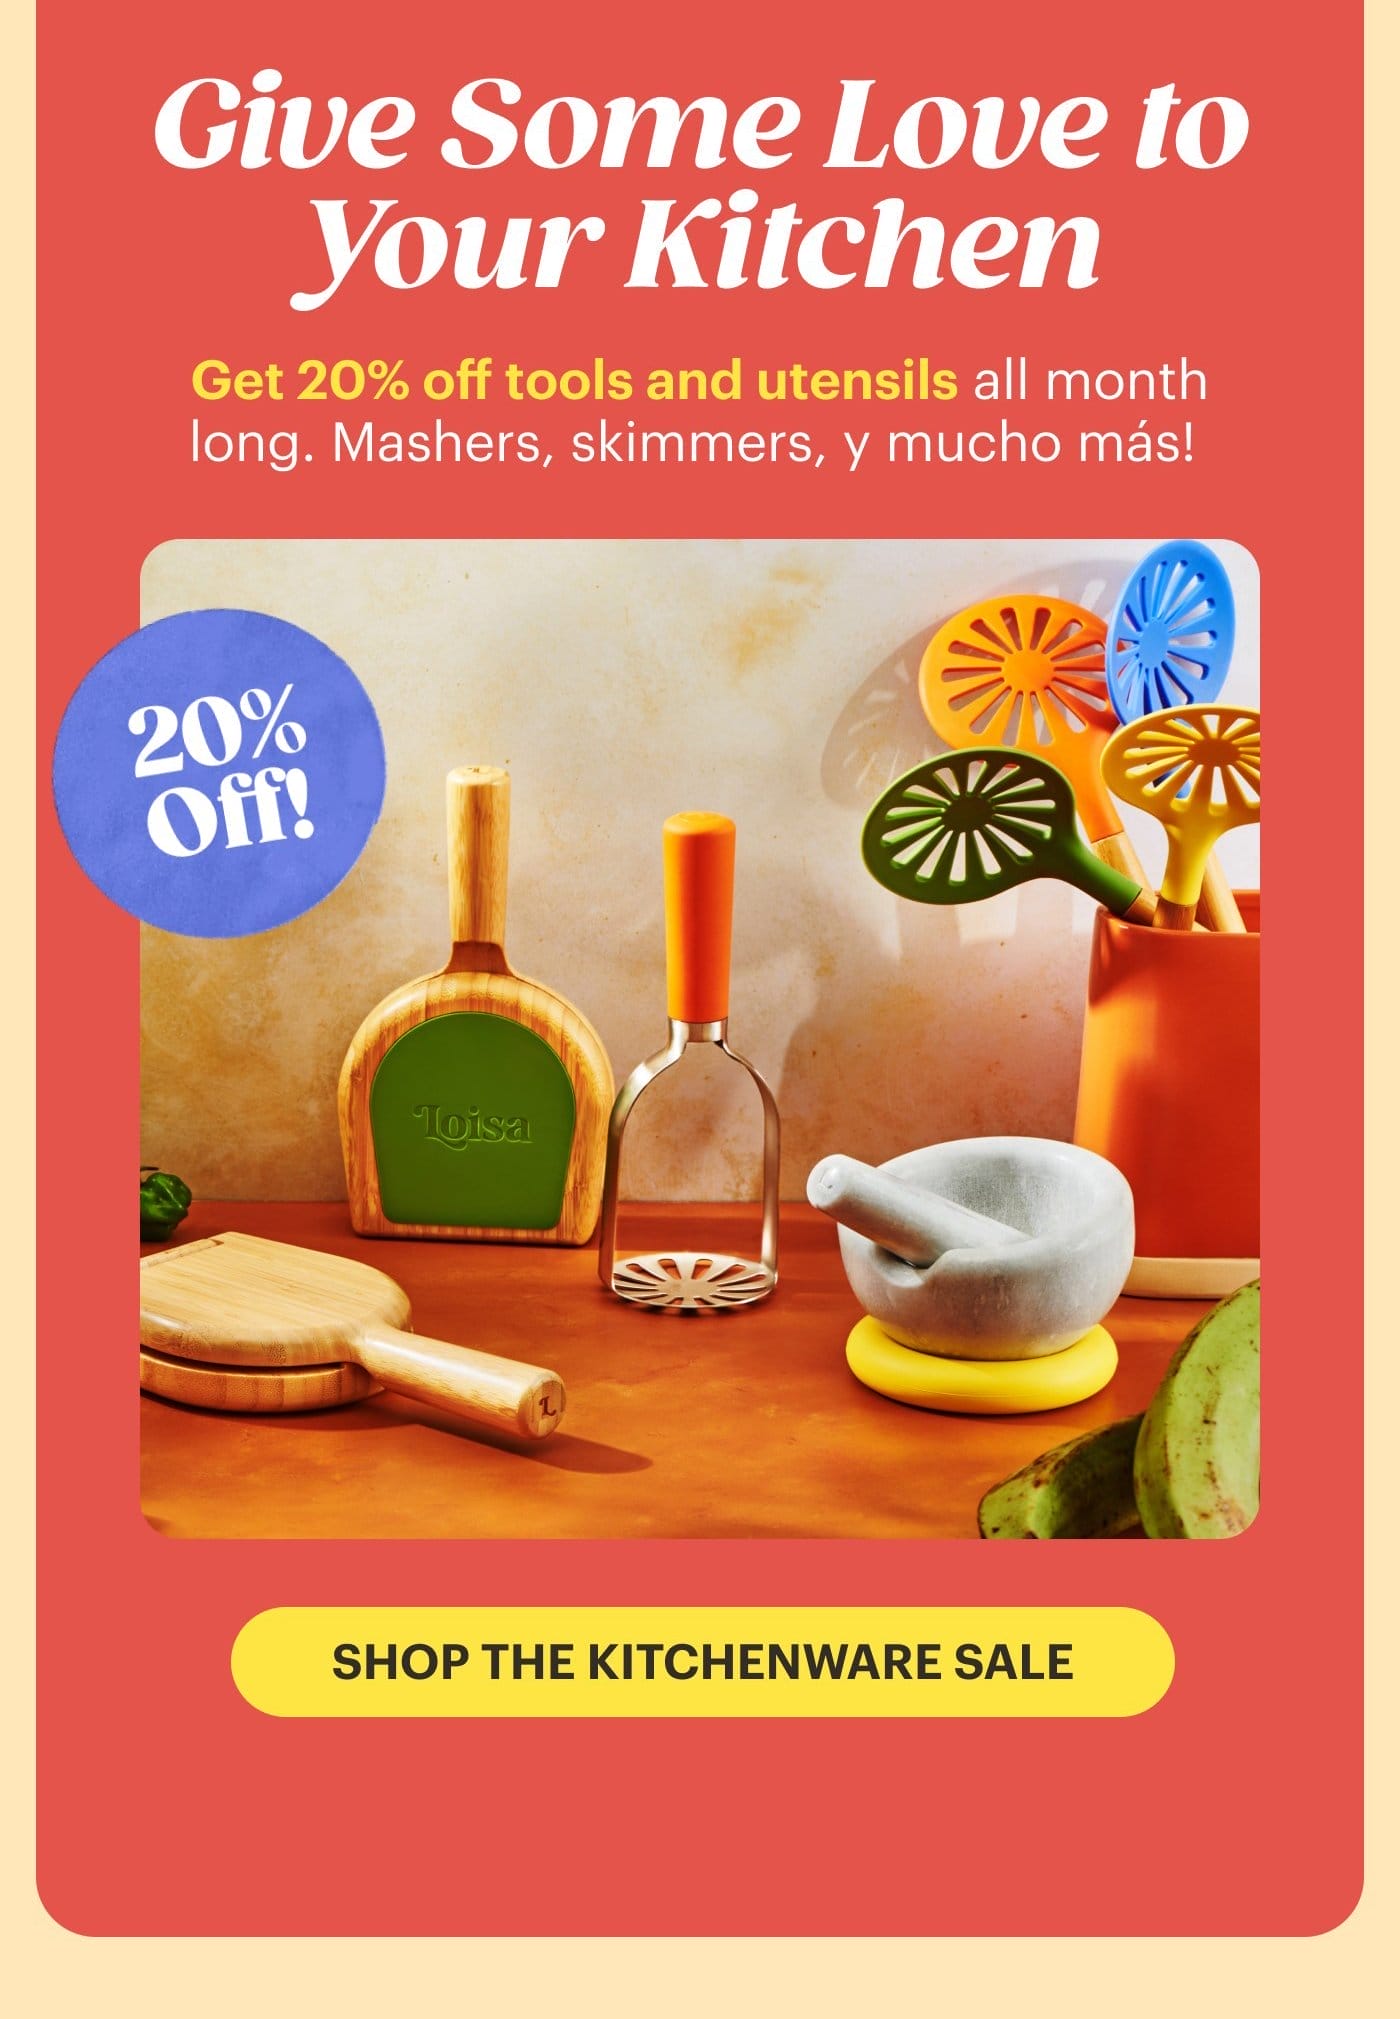 Give Some Love to Your Kitchen SHOP THE KITCHENWARE SALE